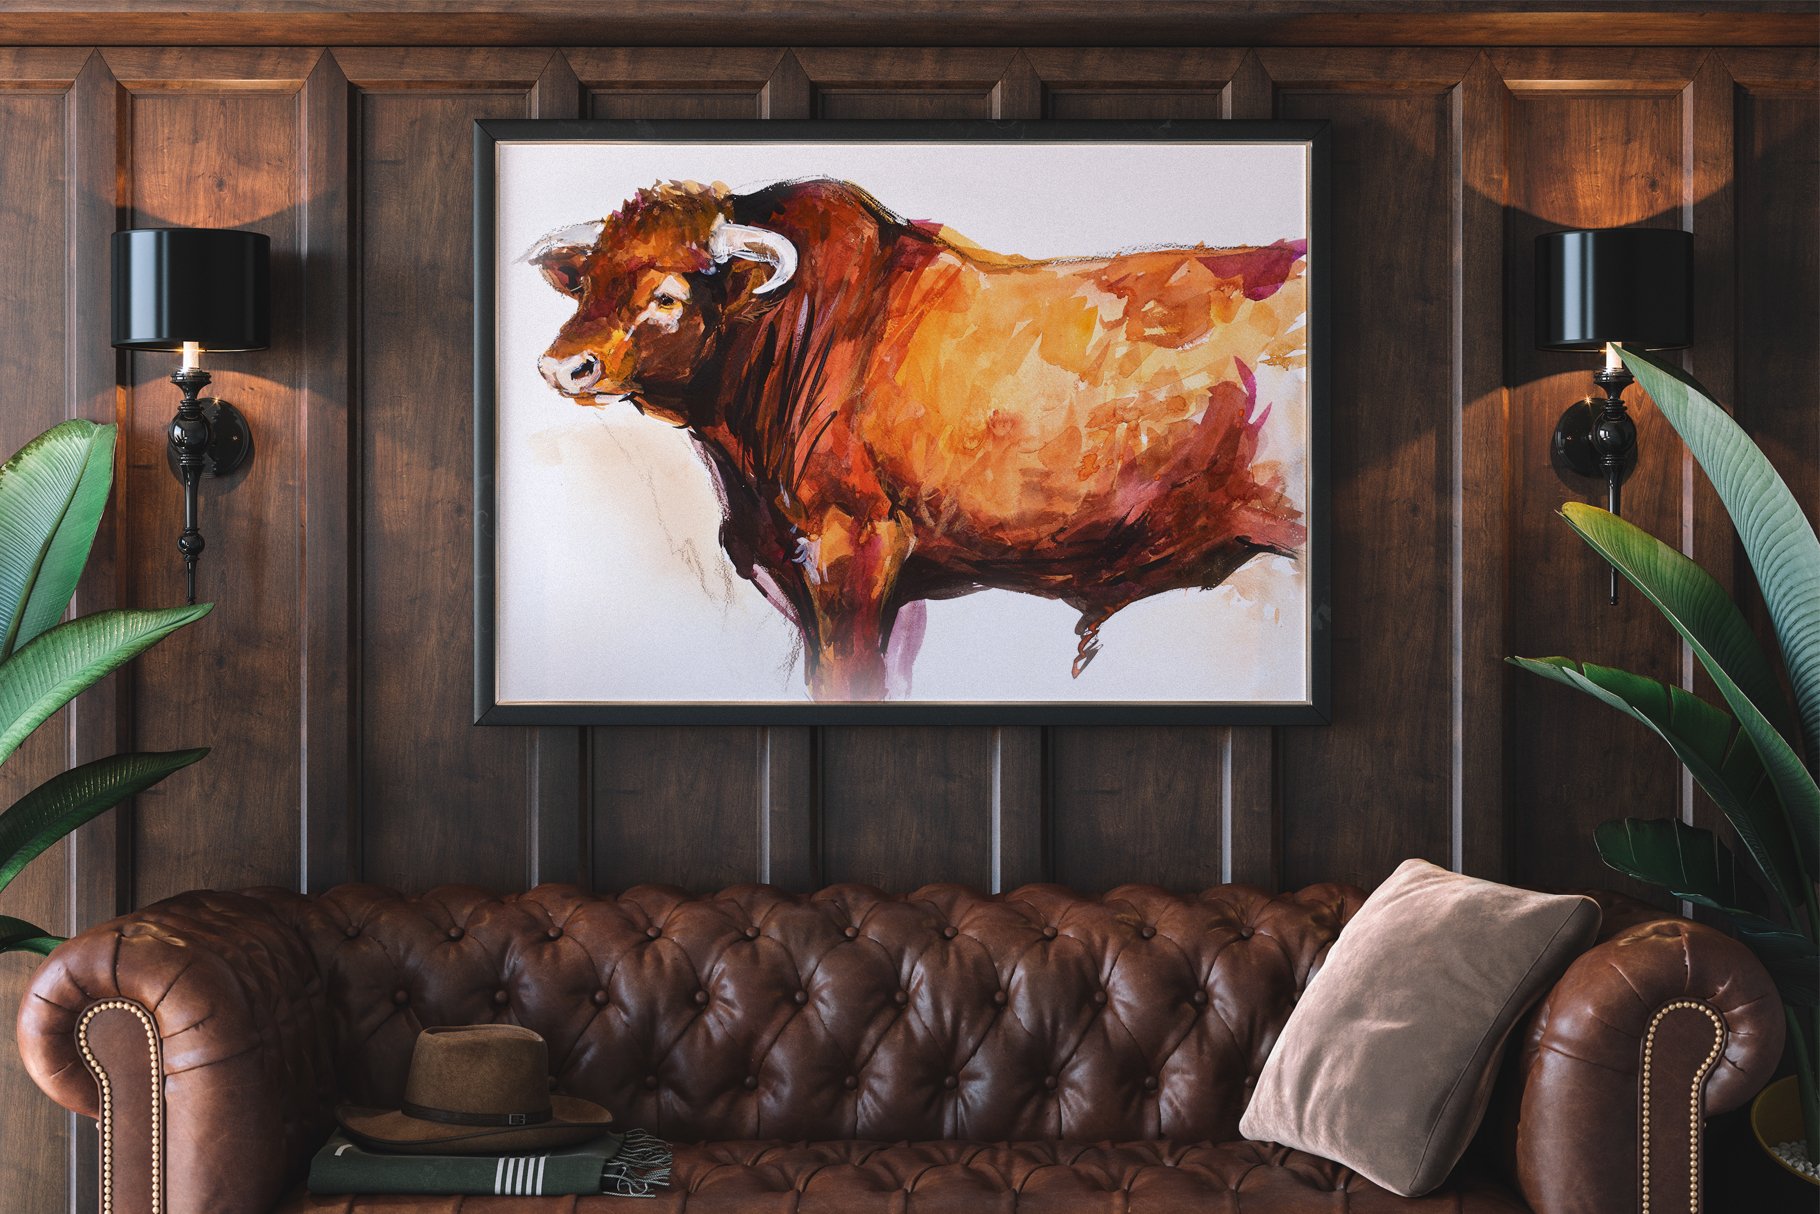 the Bull. Ox. Bison. Buffalo. Cow. preview image.